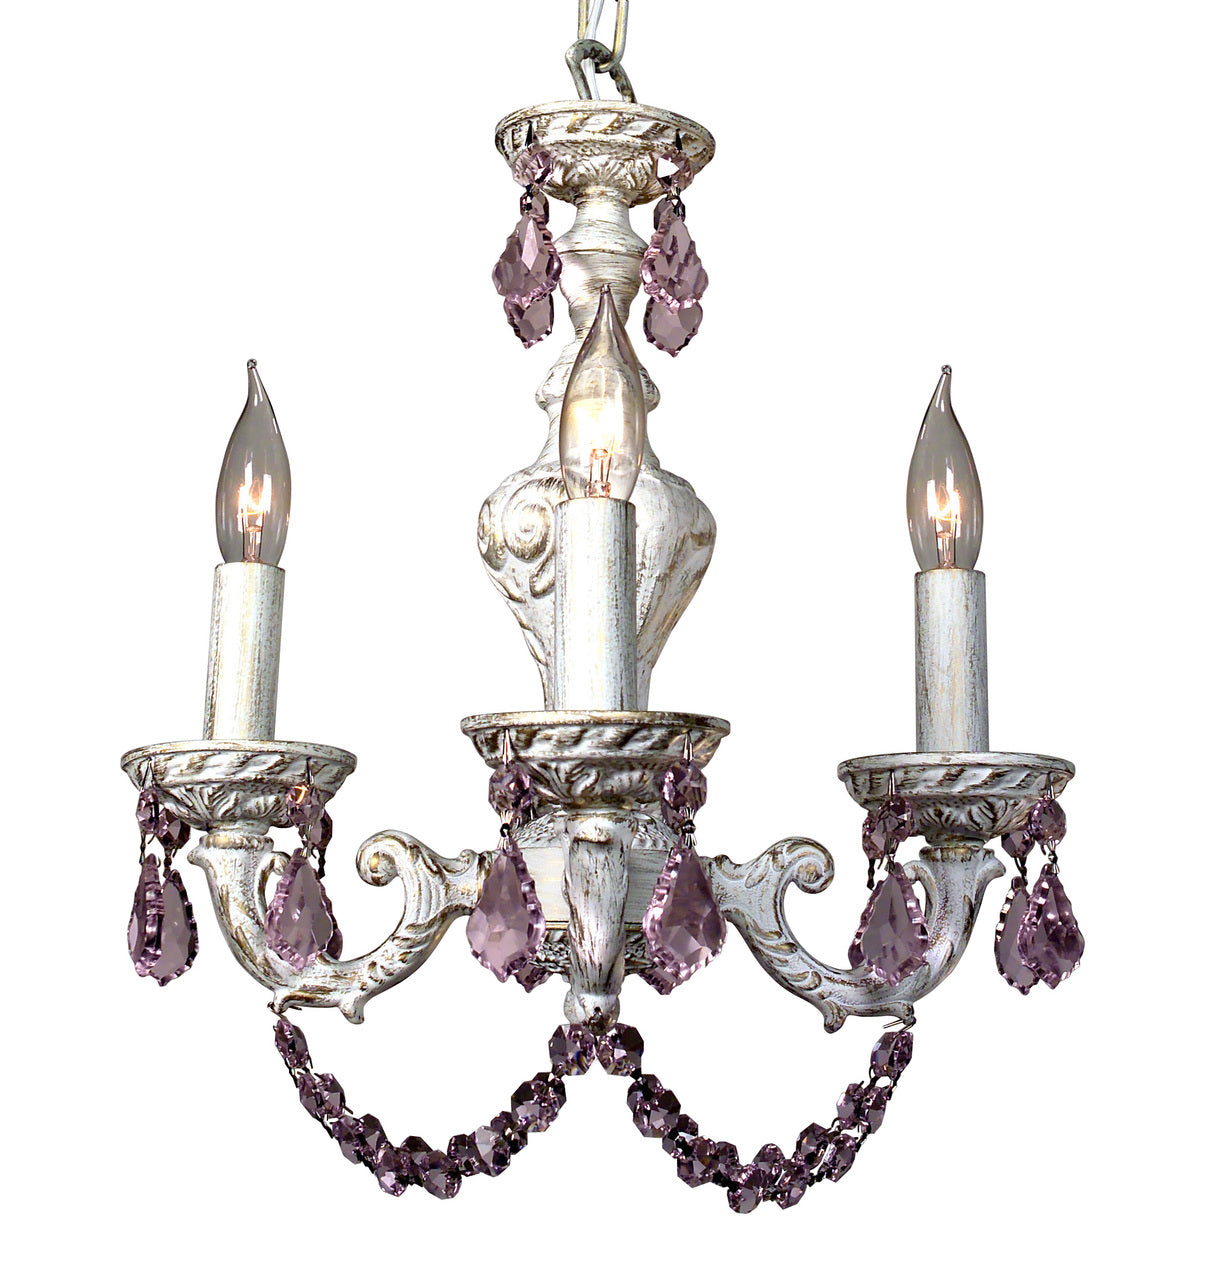 Classic Lighting 8335 AW PNK Gabrielle Crystal Mini Chandelier in Antique White